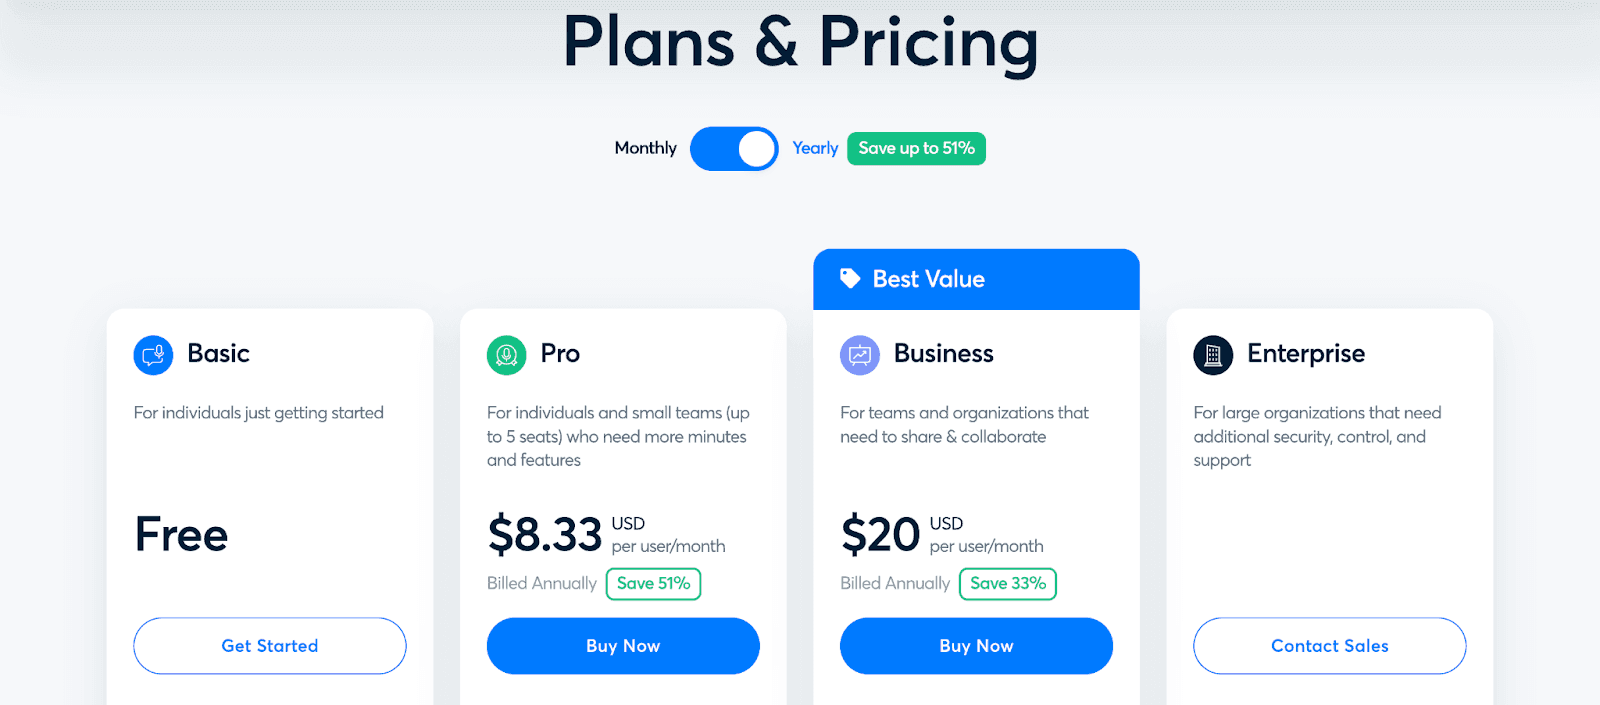 otter.ai plans and pricing webpage - Basic, Pro, Business, Enterprise